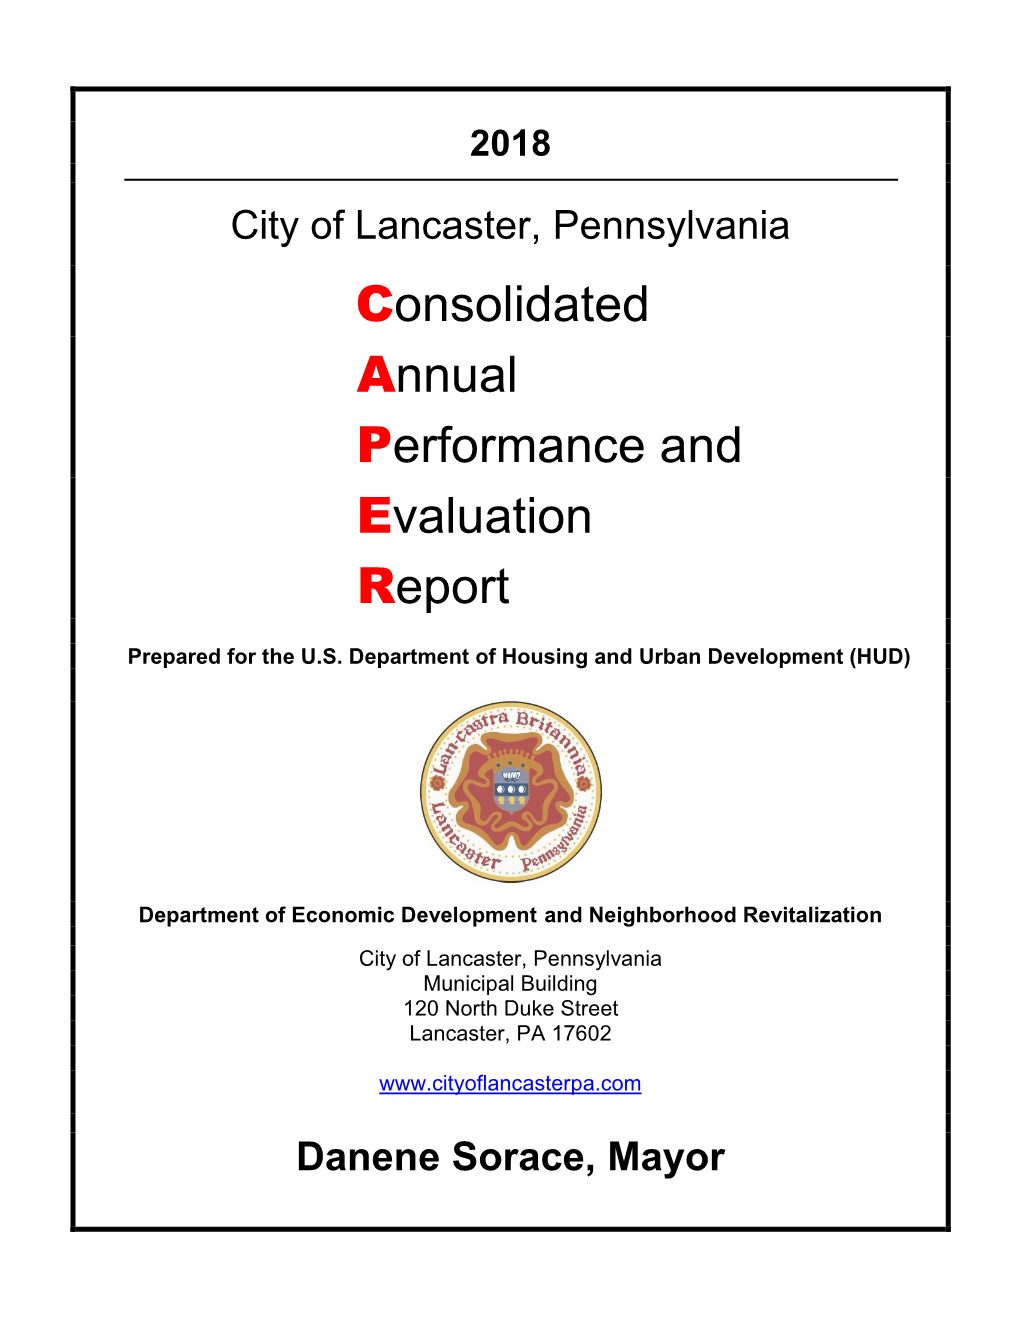 Consolidated Annual Performance and Evaluation Report